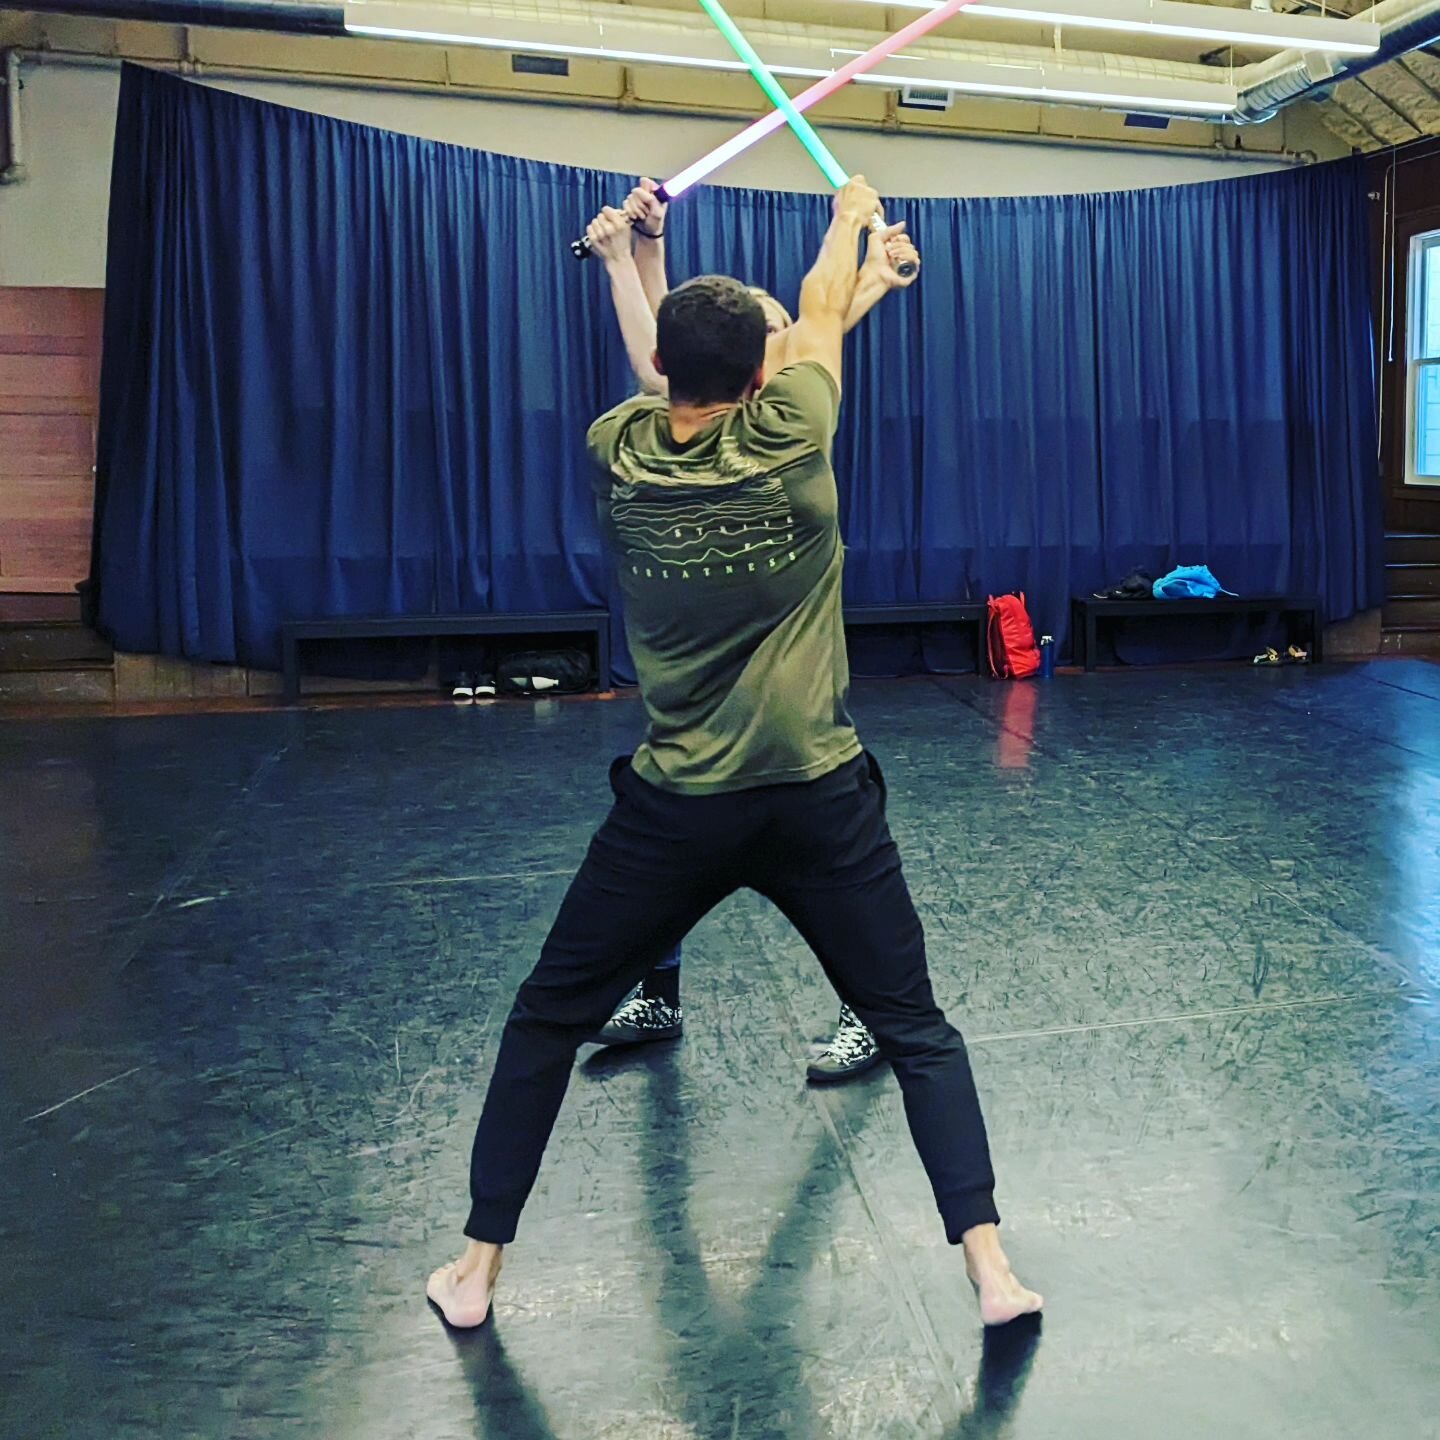 Teaching classes through September! Come give stage combat a try. Info at luxsabercorps.com

Thanks to our friends at @ludosport_sf for visiting!

#luxsabercorps #saberchoreography #starwars #lightsaber